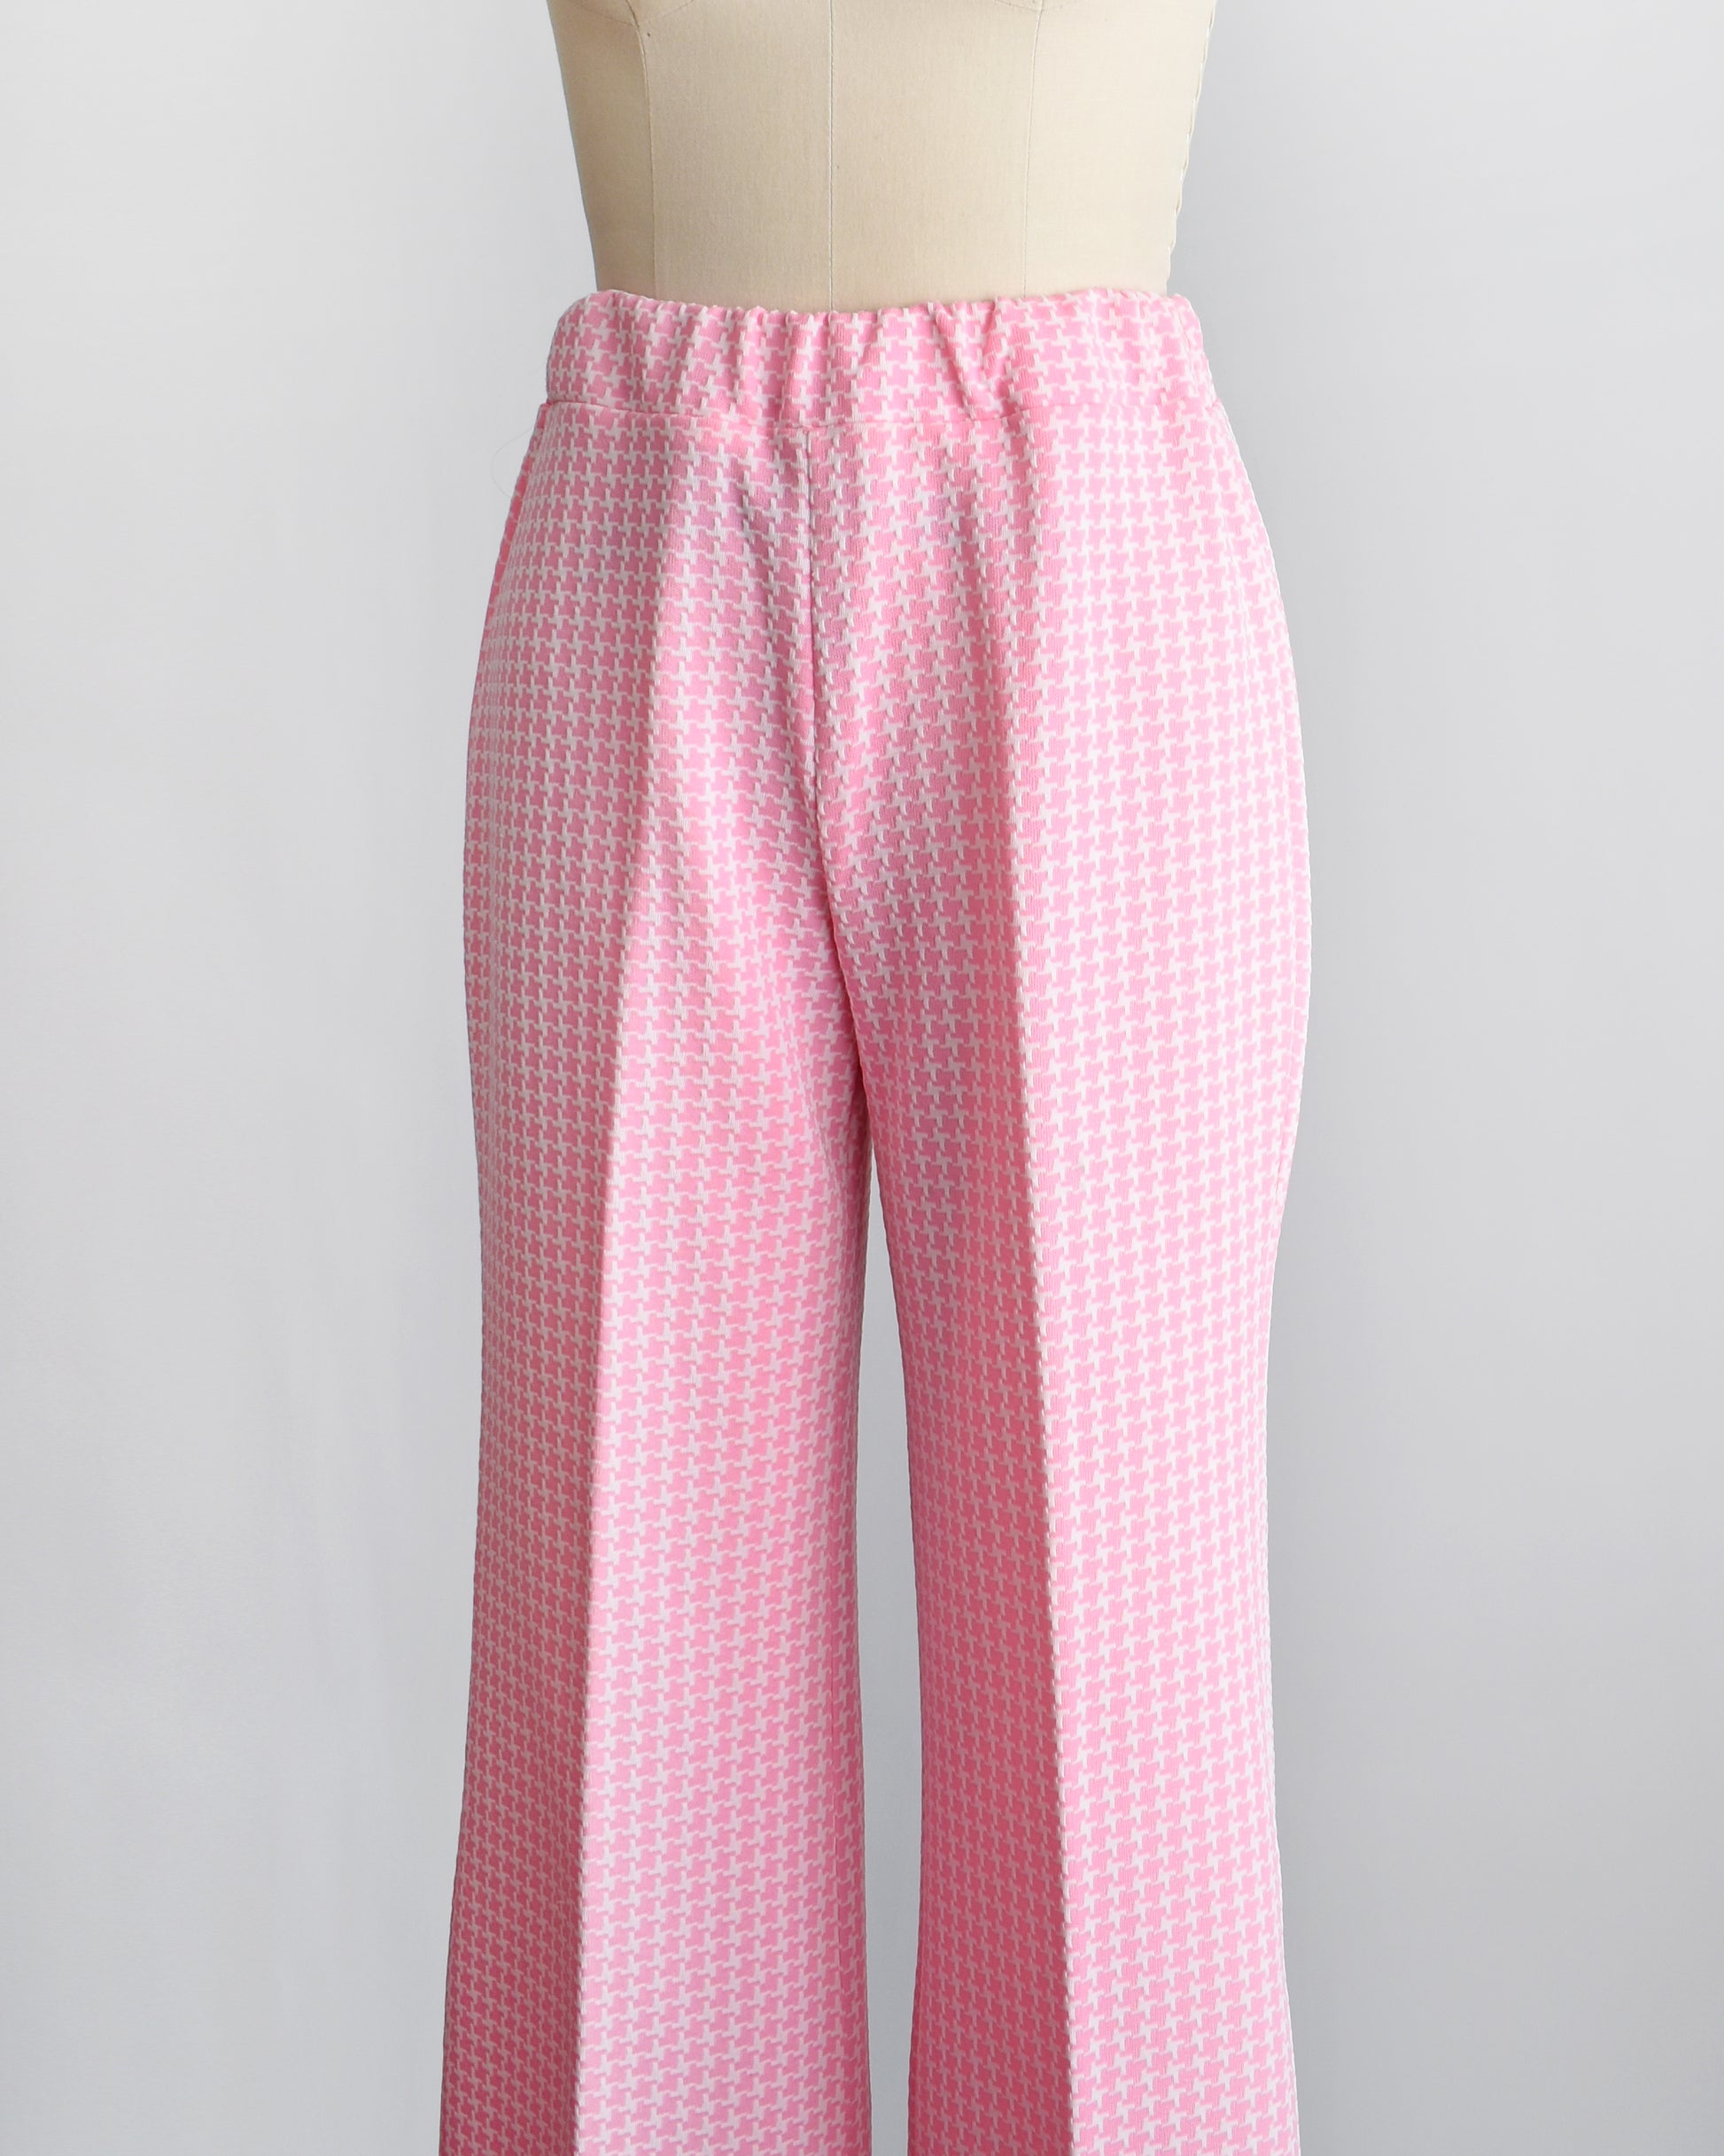 Side front view of the waist of vintage 1970s pink  and white houndstooth print wide leg pants on a dress form